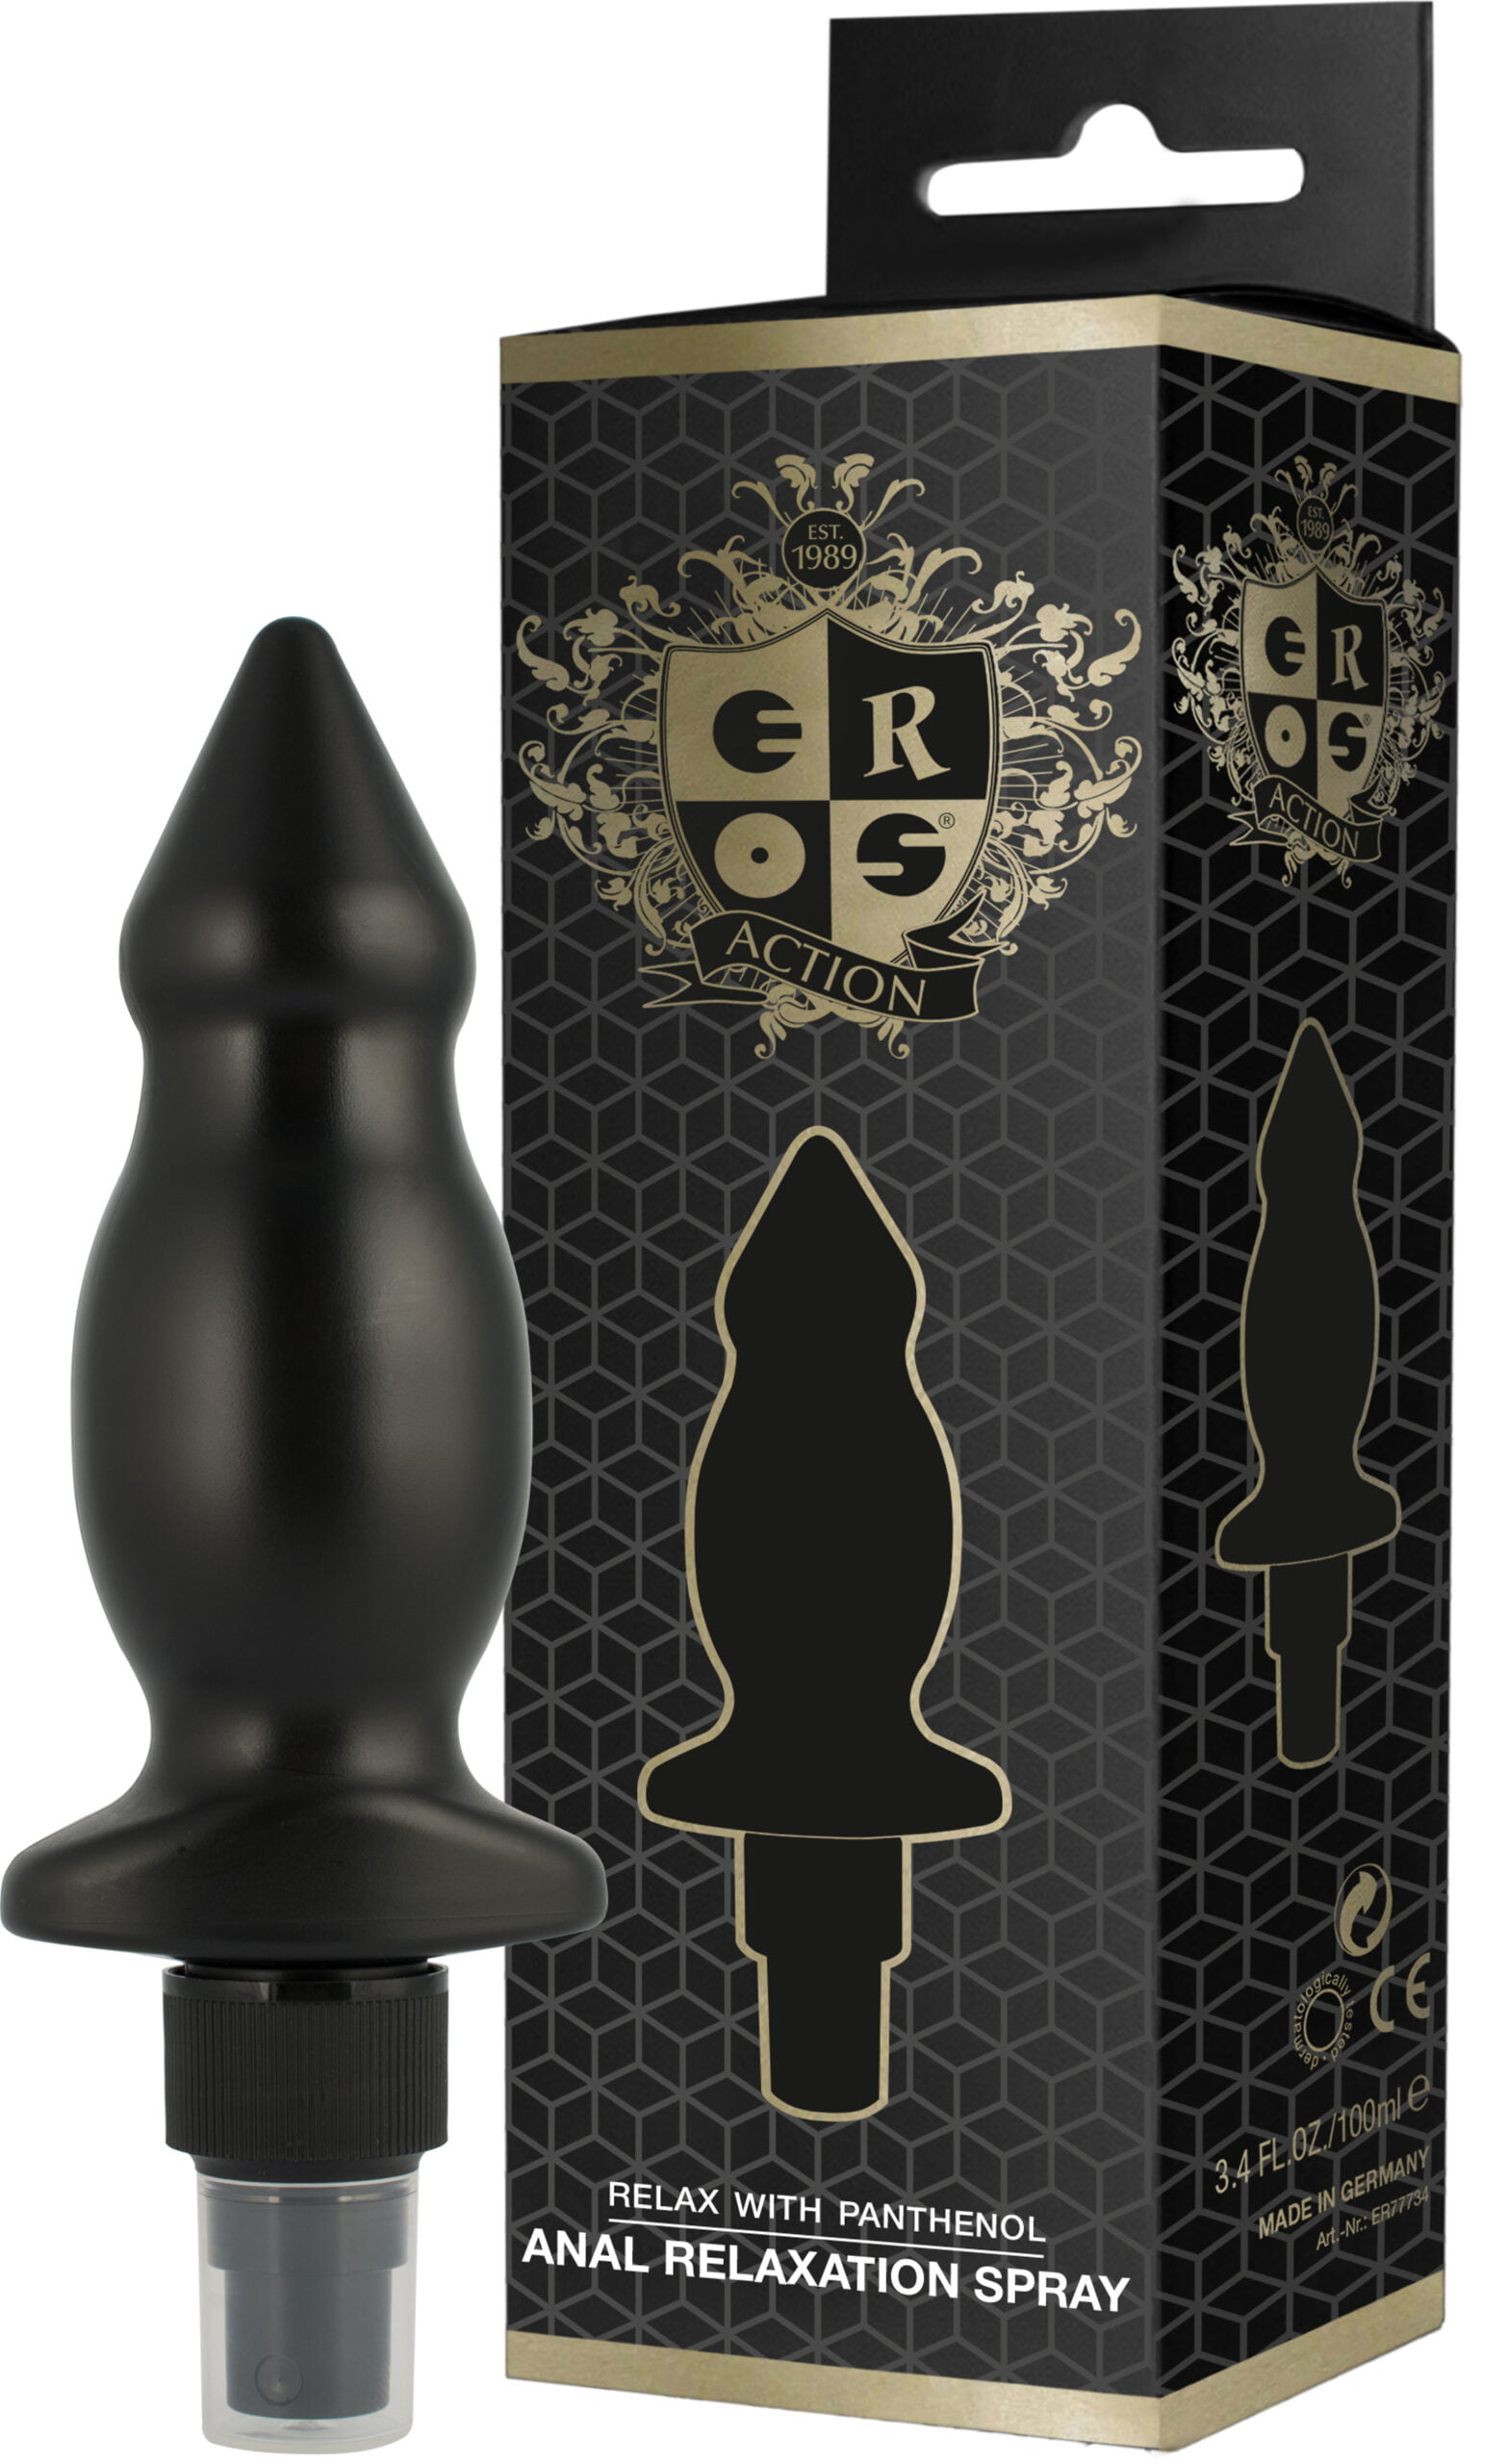 Eros Action Anal Relax Spray